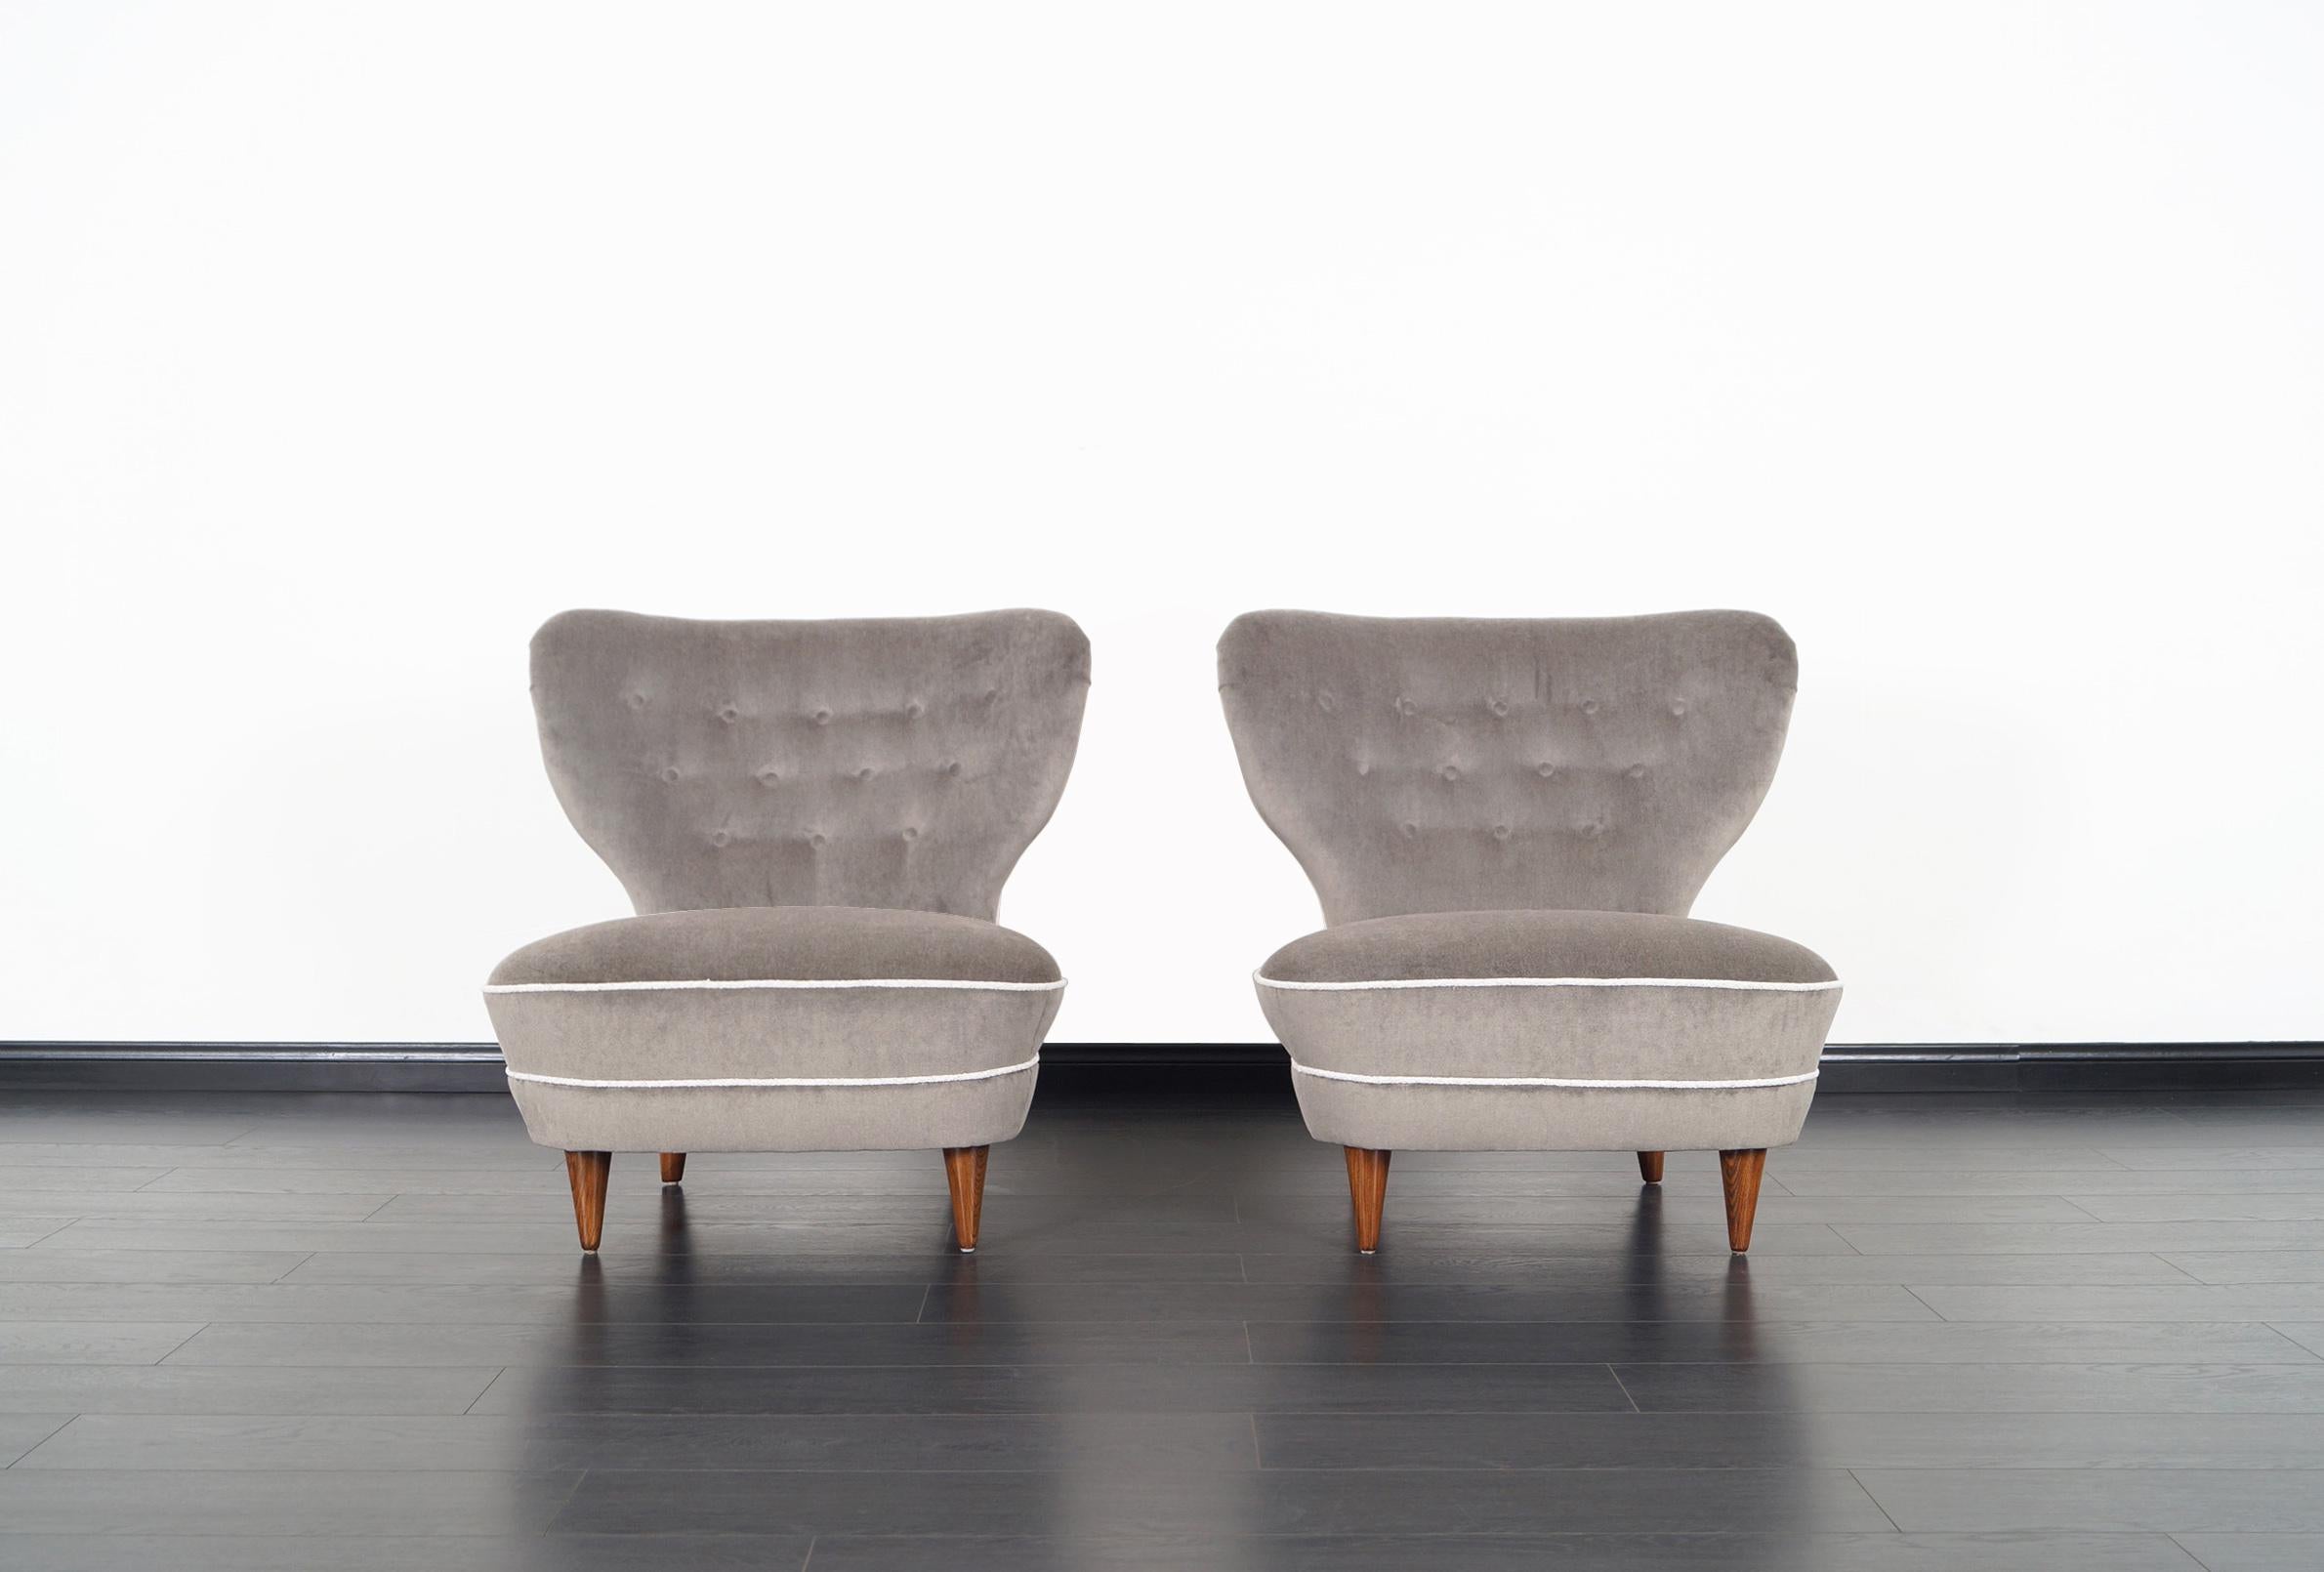 Stunning pair of vintage wingback lounge chairs designed and manufactured in the United States, circa 1950s. These chairs show clean lines and great craftsmanship. Newly upholstered in mohair with tufted details on the backrest.